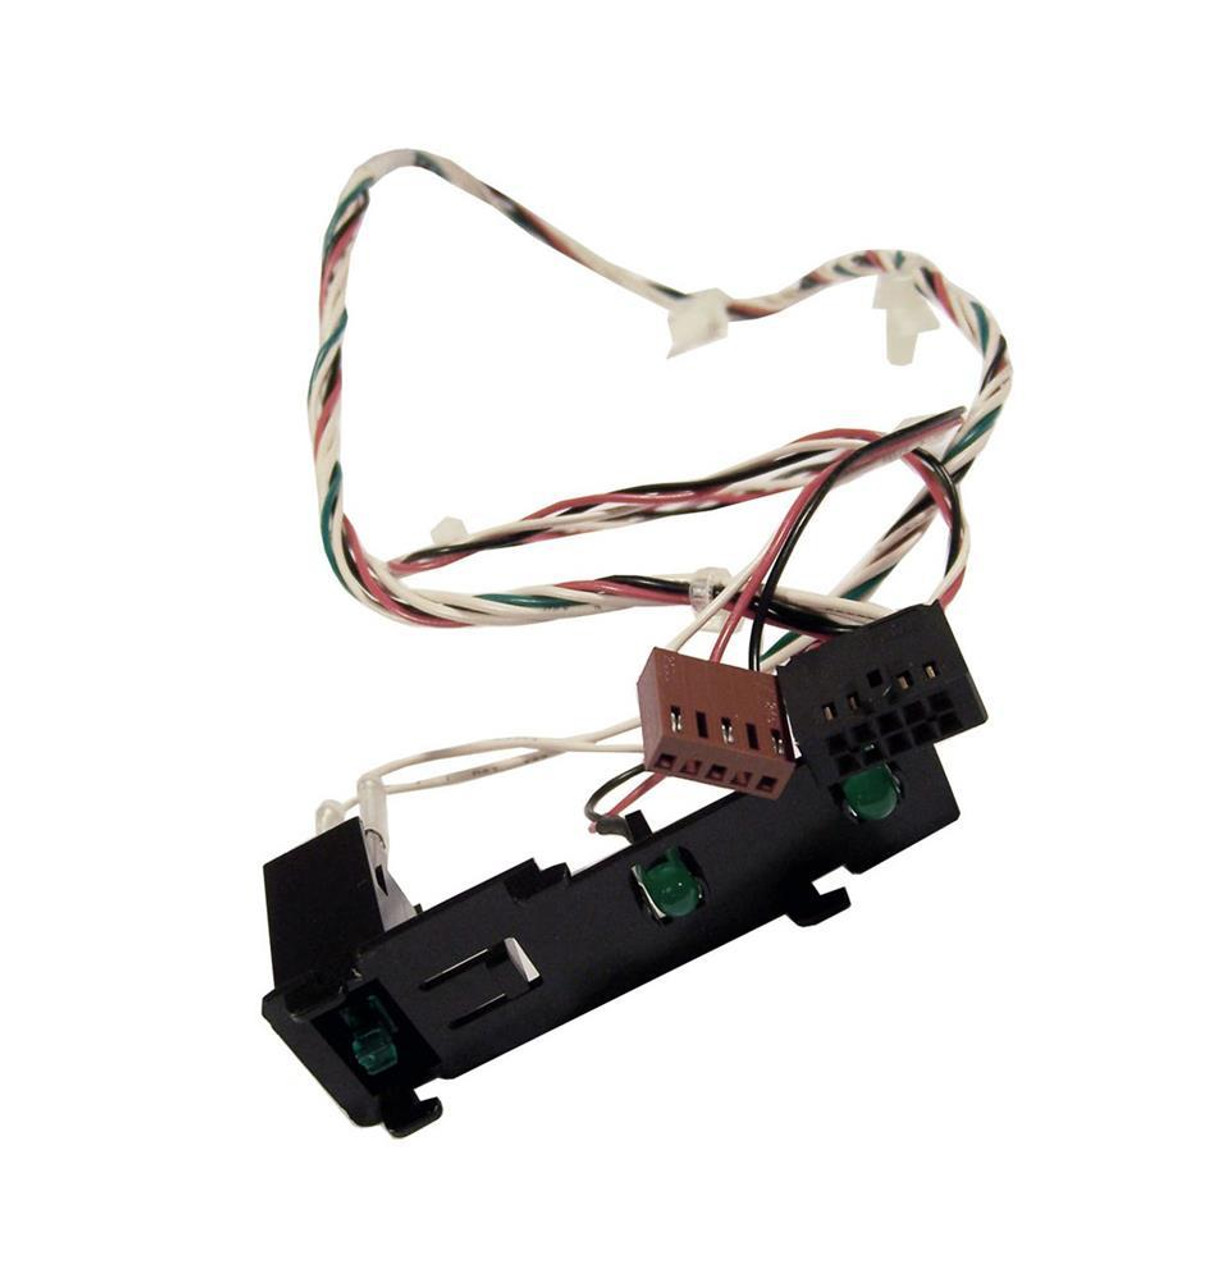 179138-002 Compaq Power Switch And Status Leds With Cable And Mounting Bracket